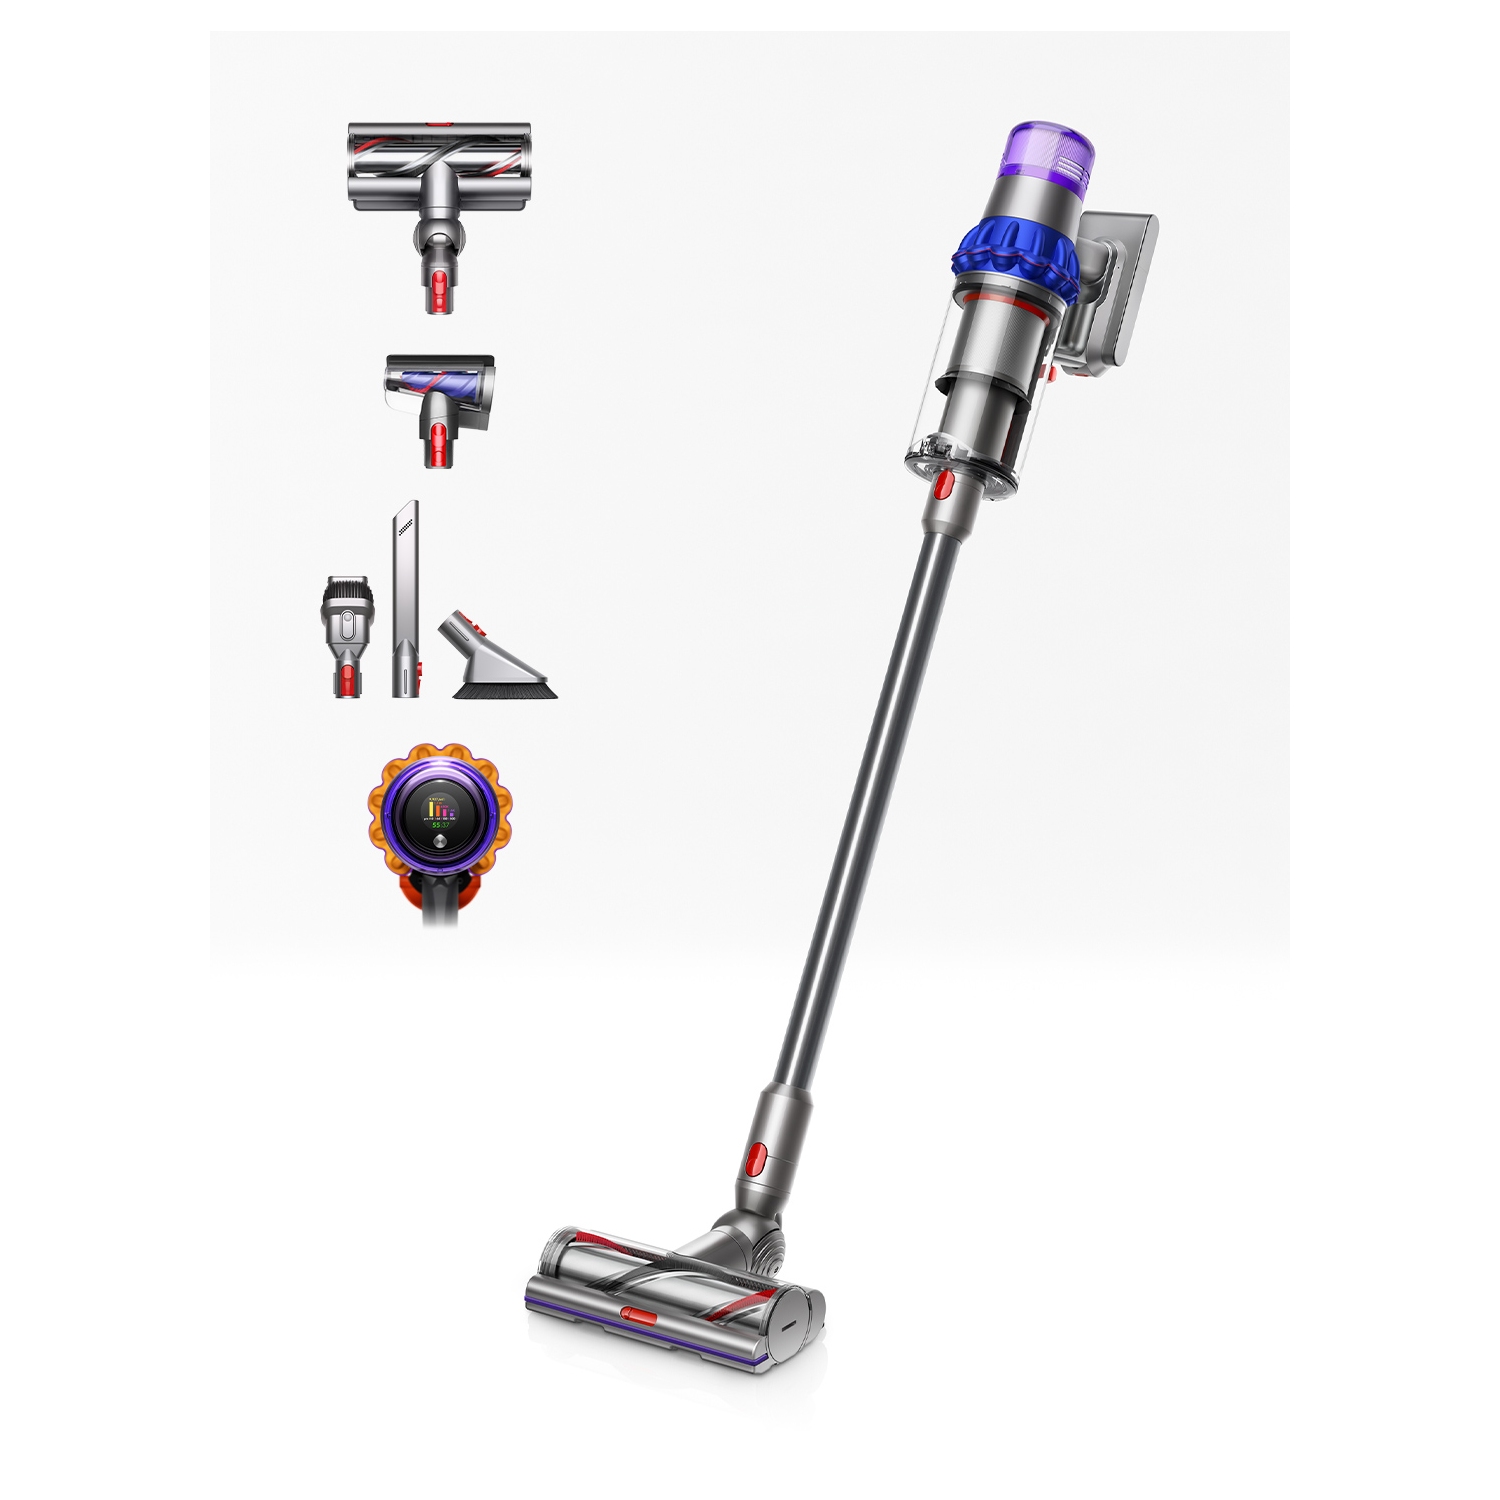 Dyson V15 Detect Animal Cordless Stick Cleaner - 60 Minutes Run Time - 8